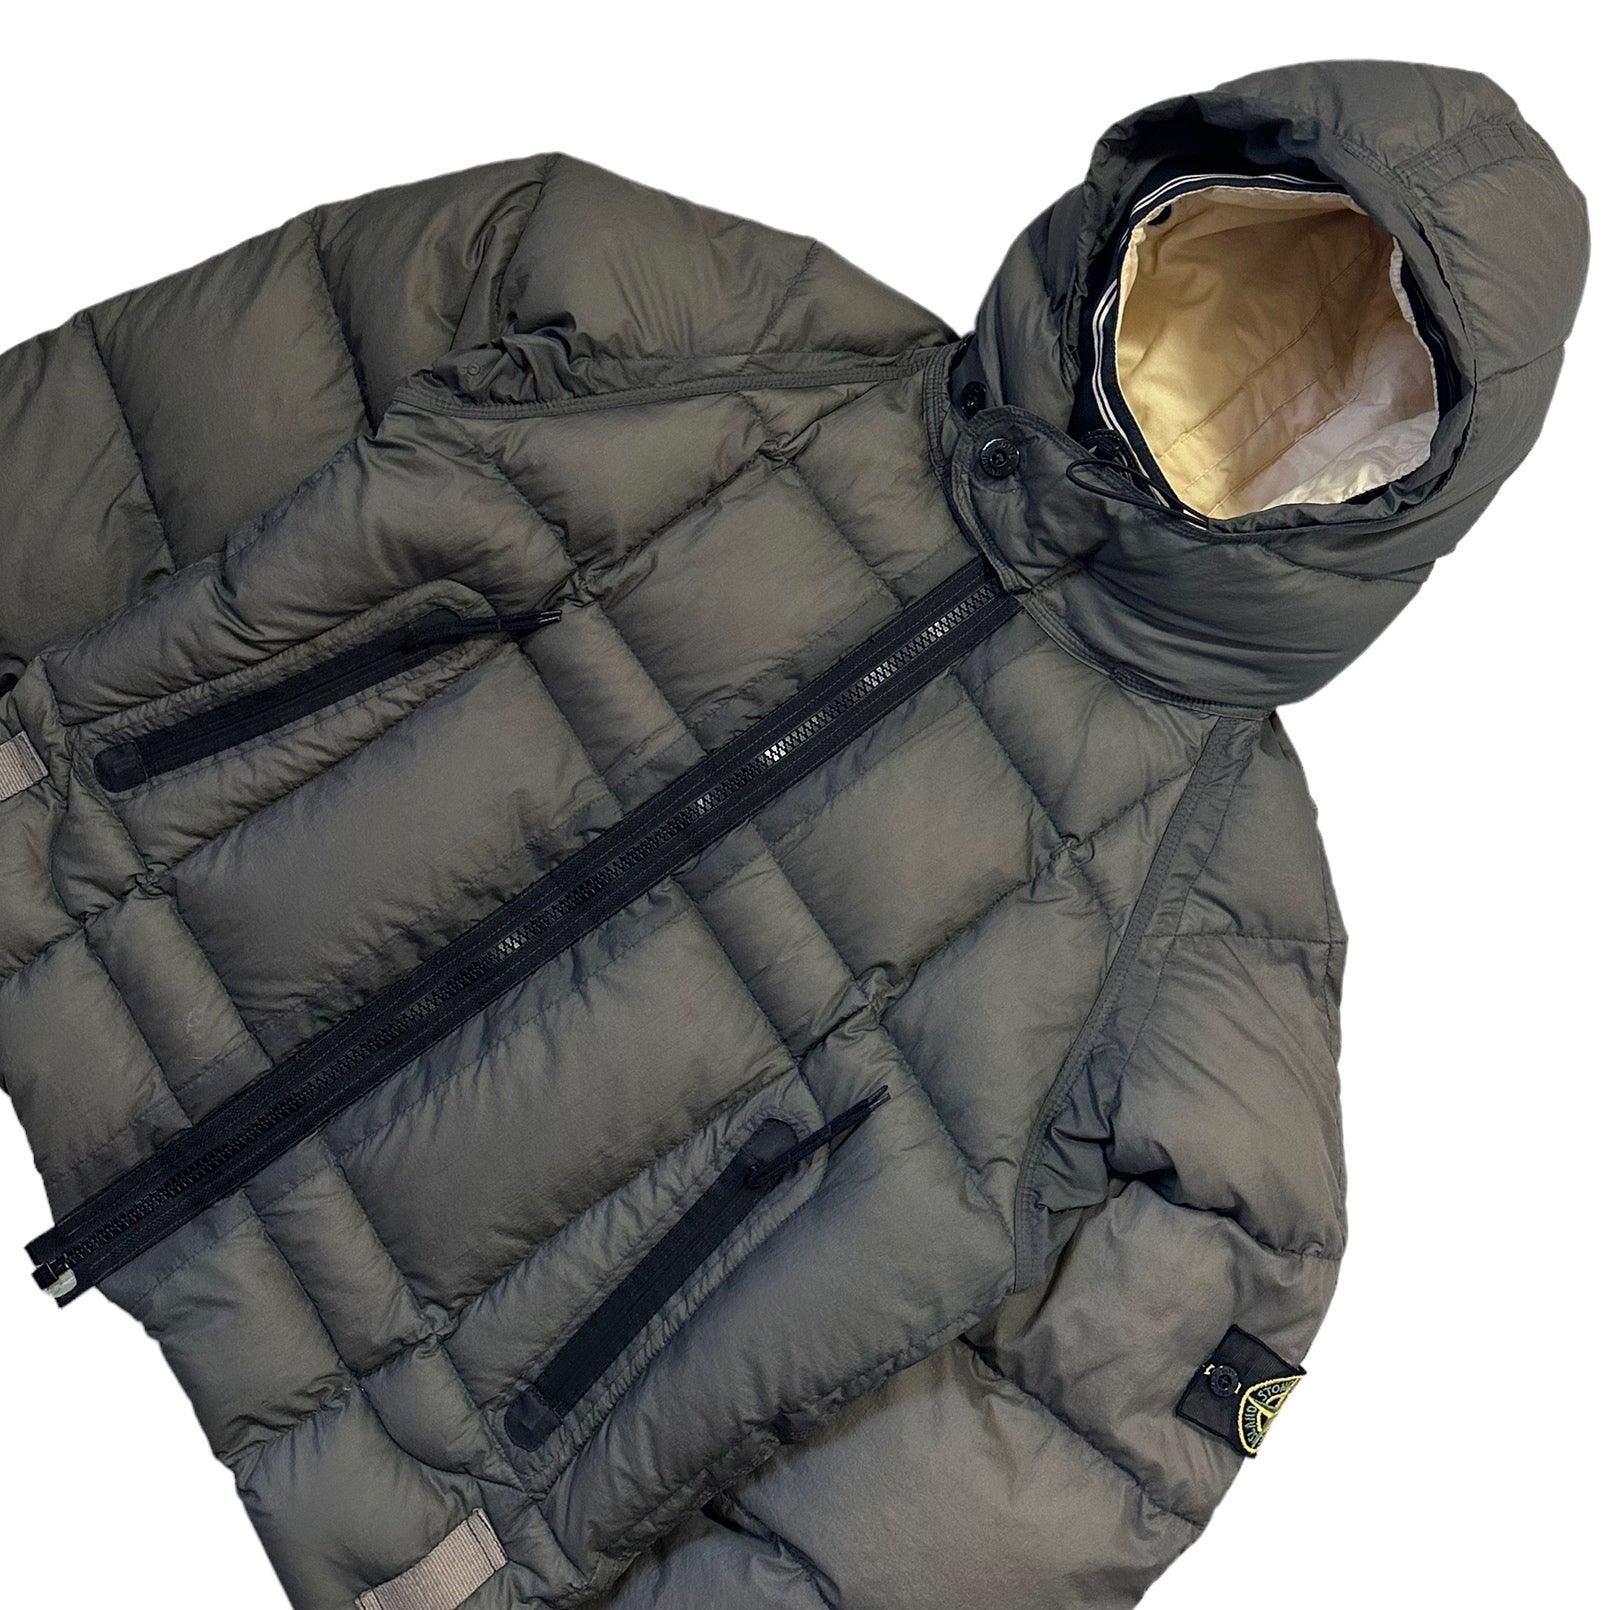 Stone Island Opaque Nylon Tela Goose Down Jacket from A/W 2006 with Dutch Rope Hood Inner - Known Source